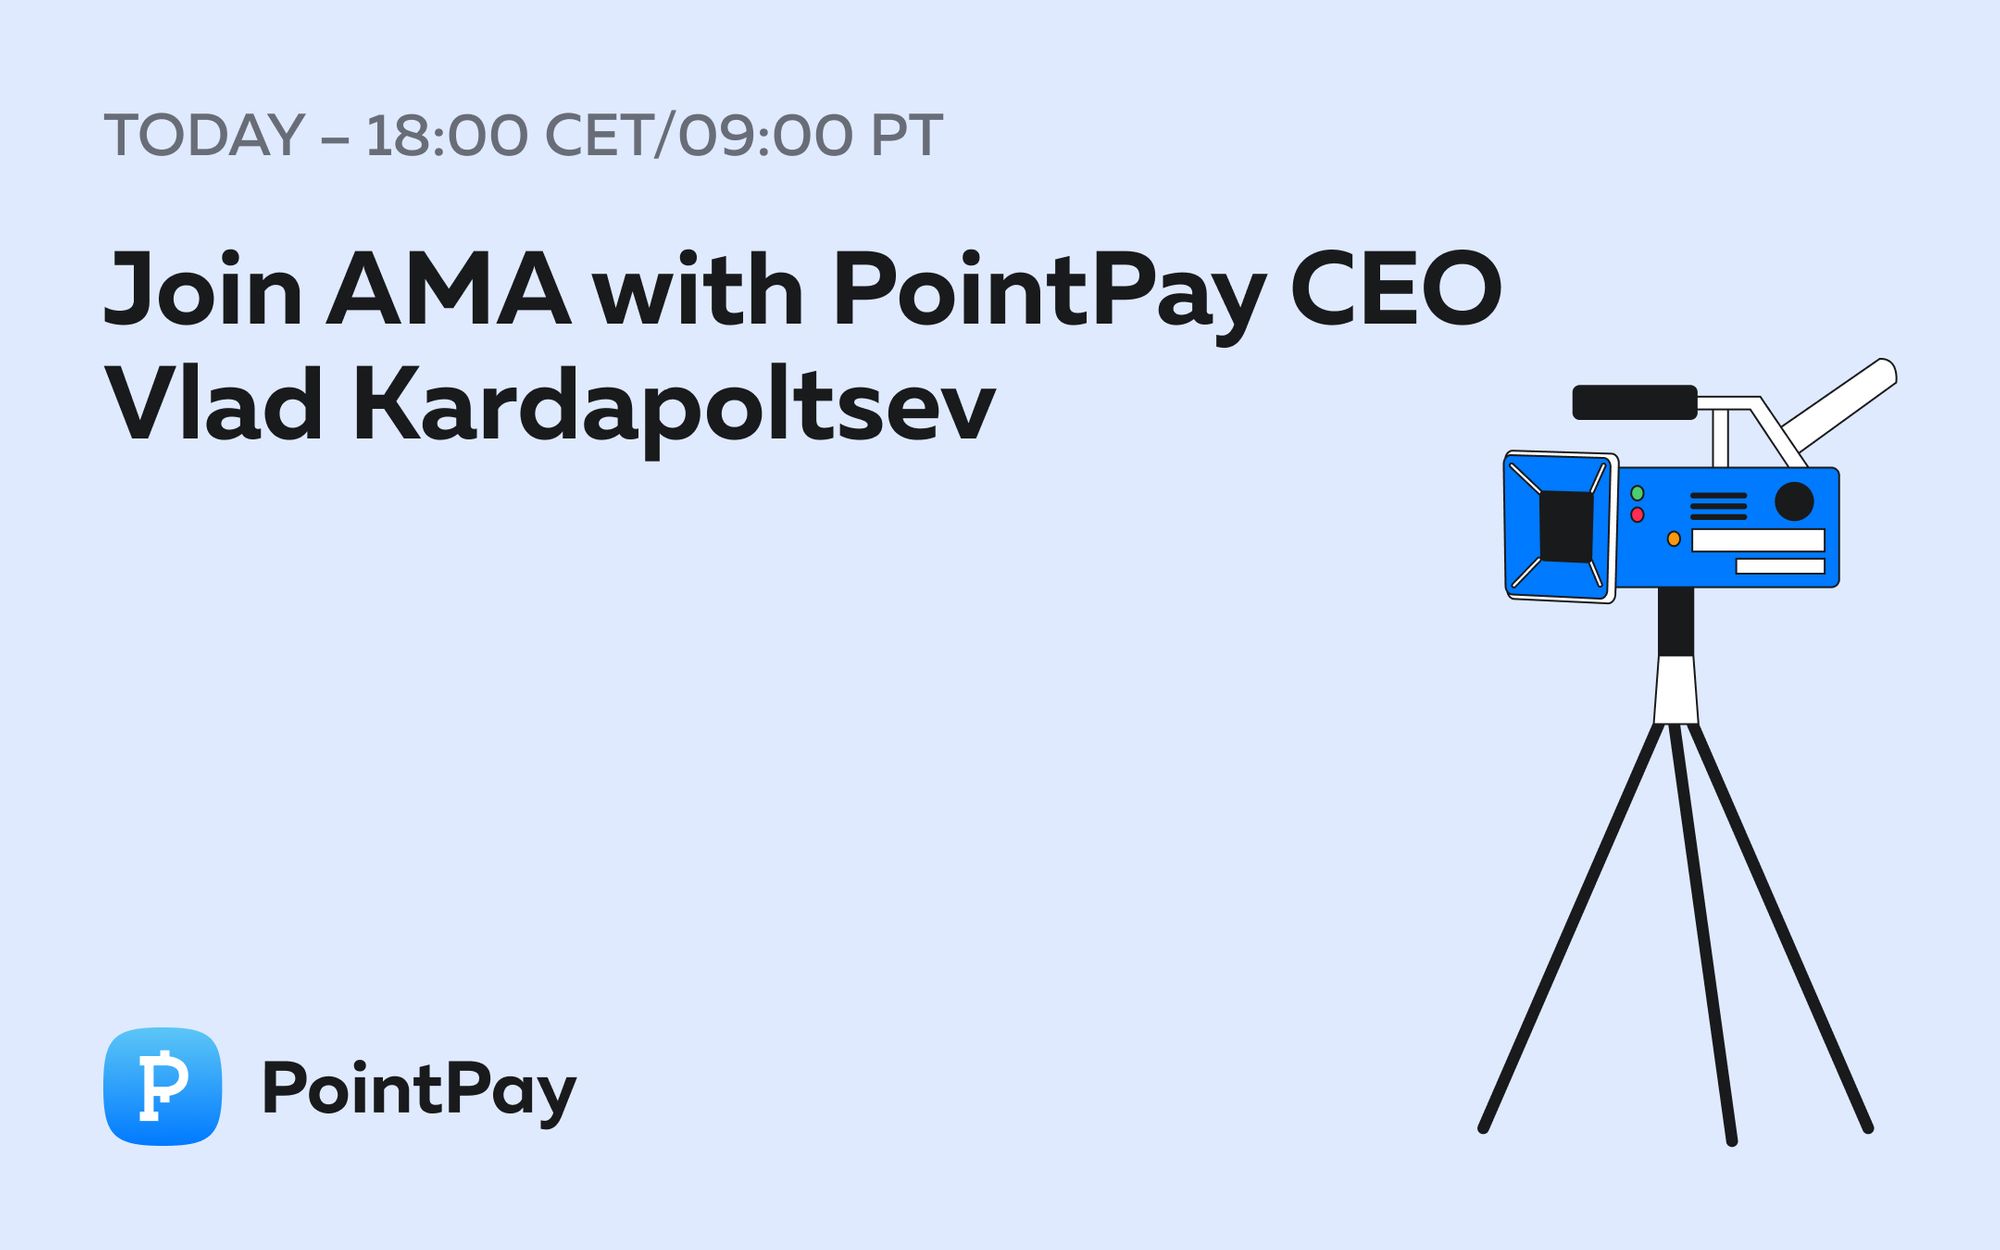 Join AMA with PointPay CEO Vladimir Kardapoltsev on the 23rd of February (18:00 CET time)